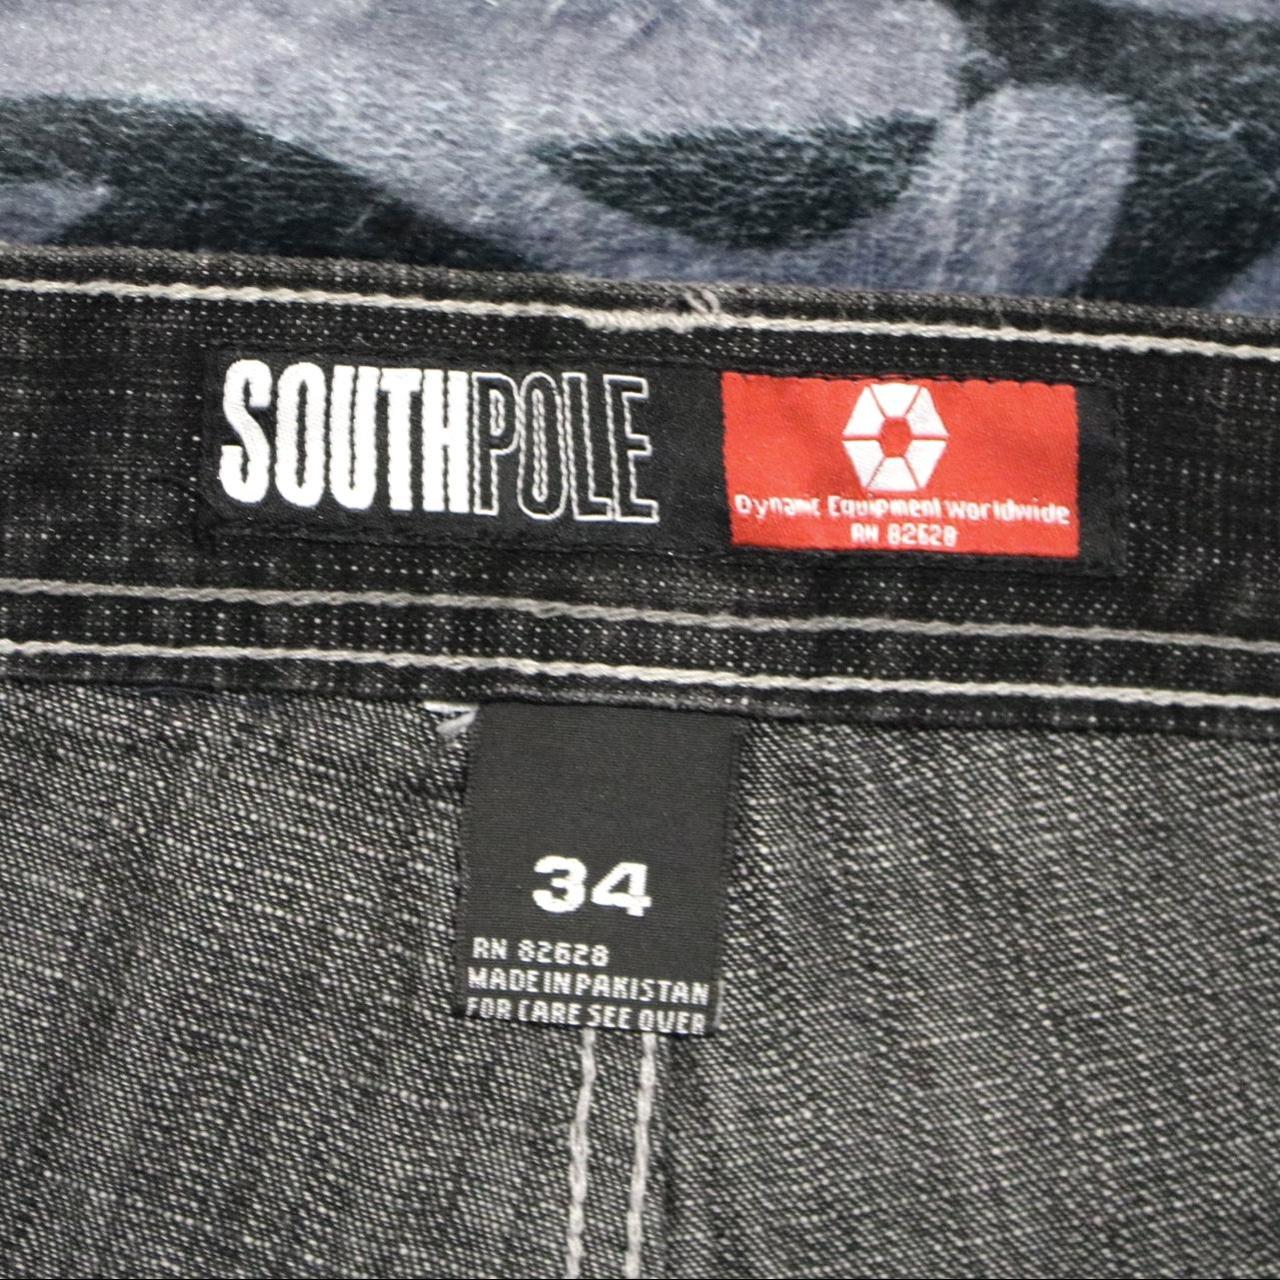 Southpole Men's Black and White Jeans | Depop